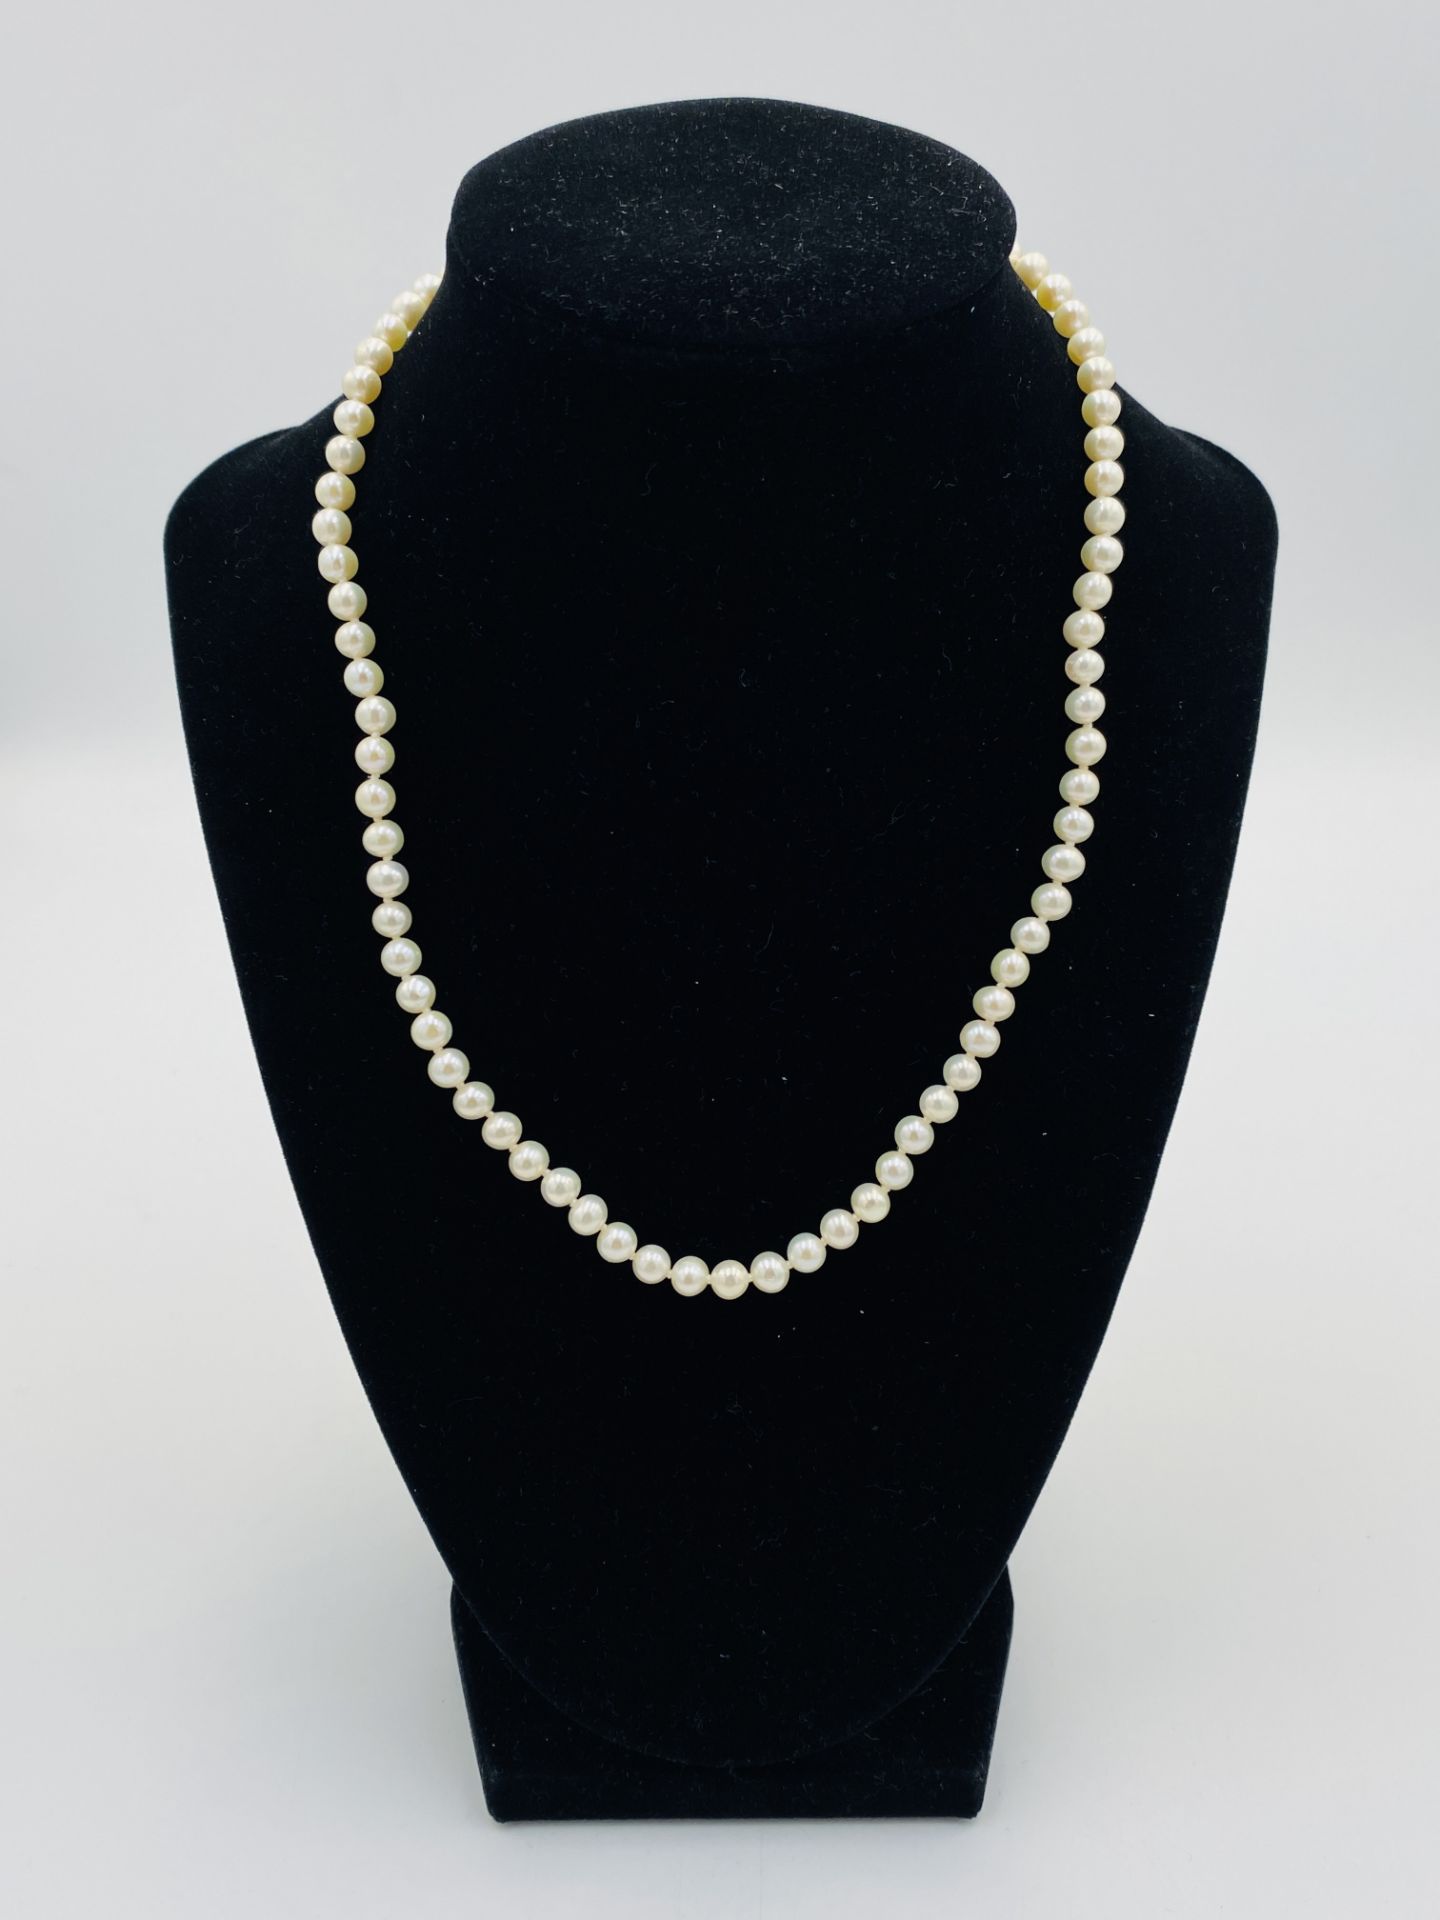 Pearl necklace with 9ct gold clasp - Image 3 of 4